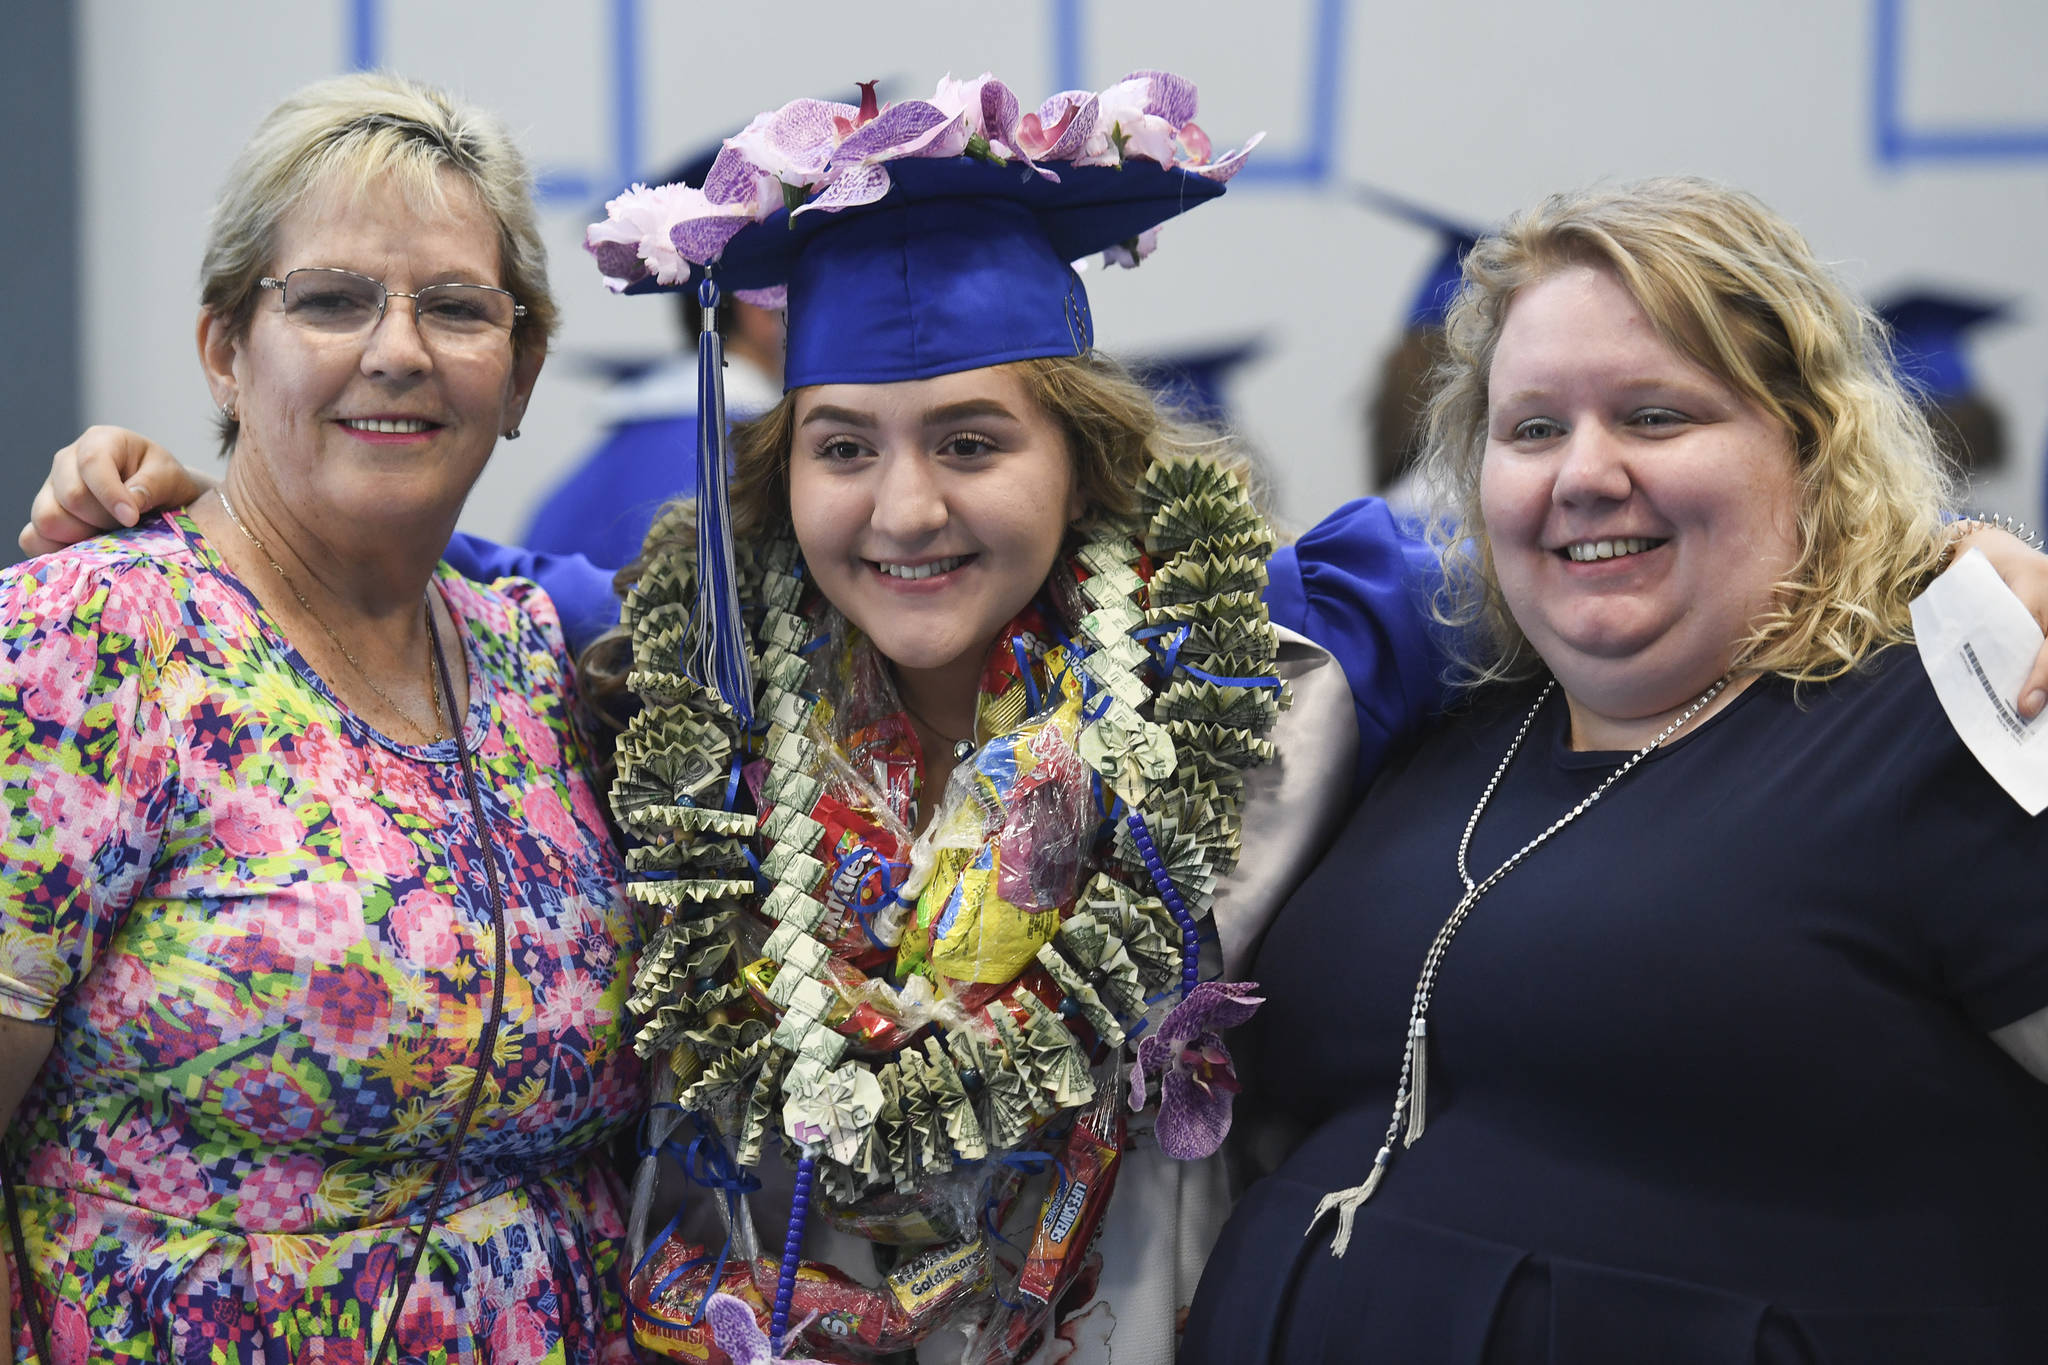 Karina Ireno poses for a picture with her mother, Holly, right, and grandmother, Christina Tisdale before the Thunder Mountain High School graduation on Sunday, May 26, 2019. (Michael Penn | Juneau Empire)